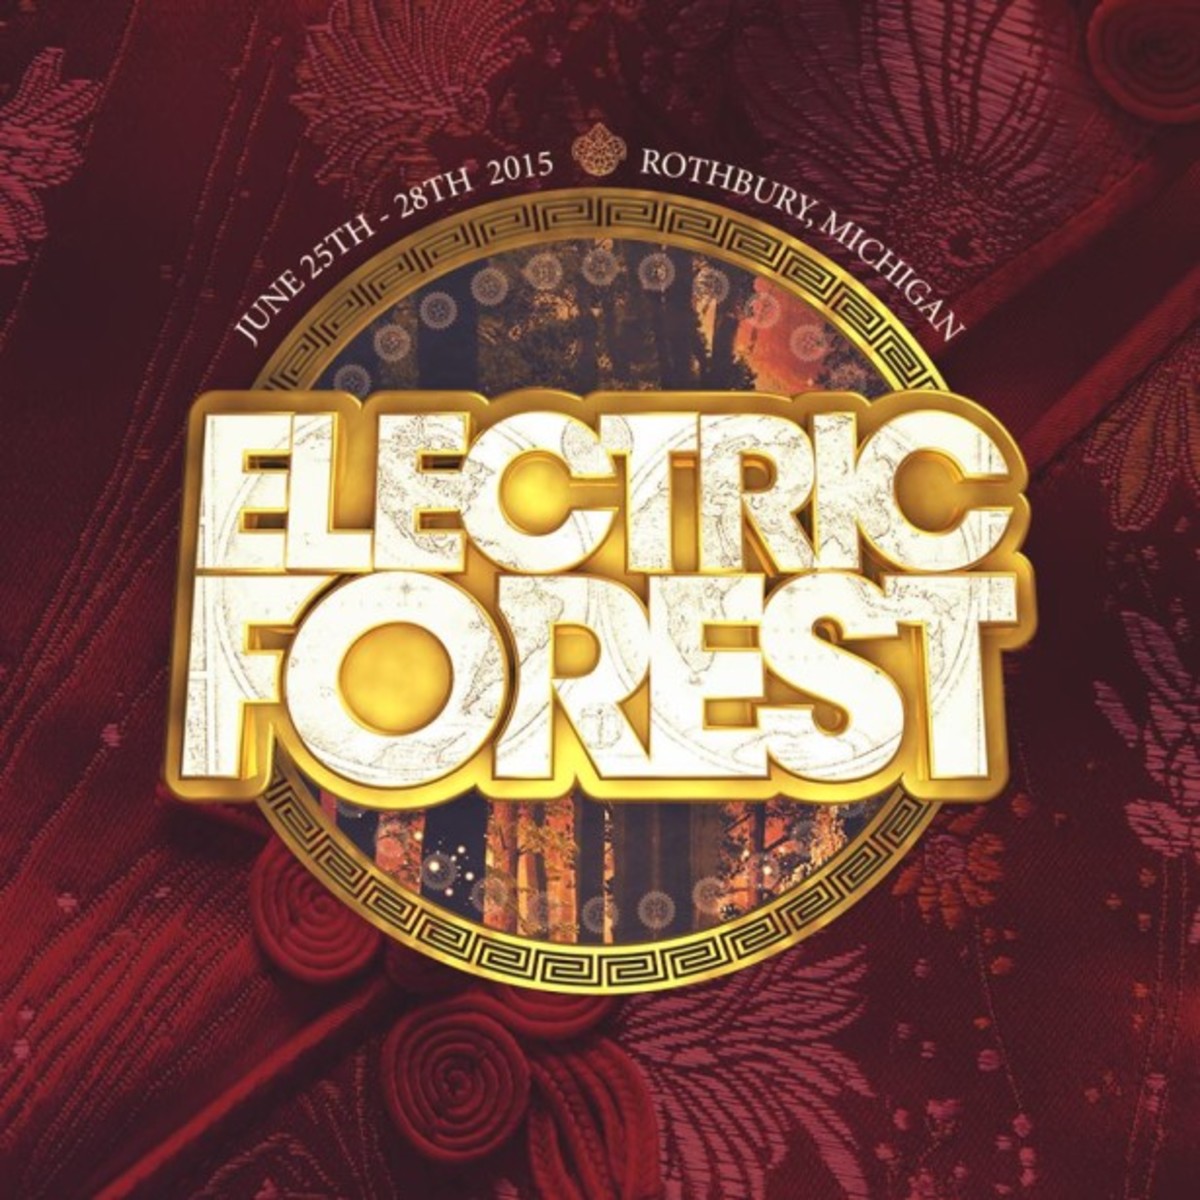 Electric Forest Sold Out - How You Can Still Get Tickets...